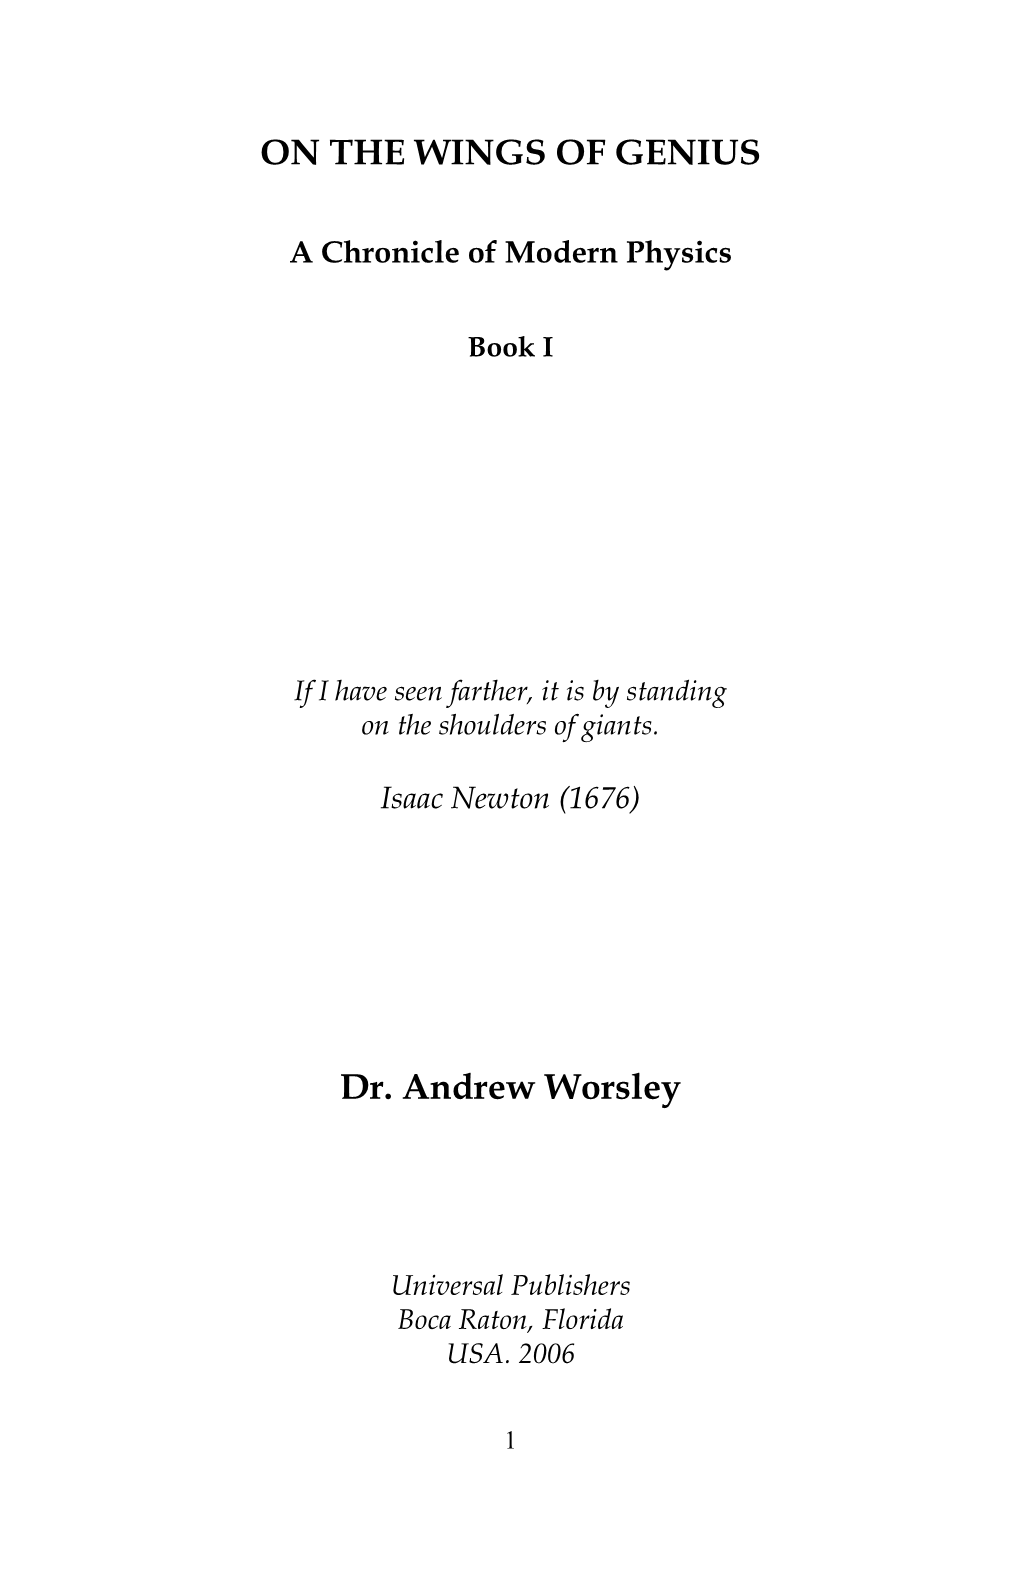 On the Wings of Genius: a Chronicle of Modern Physics, Book I